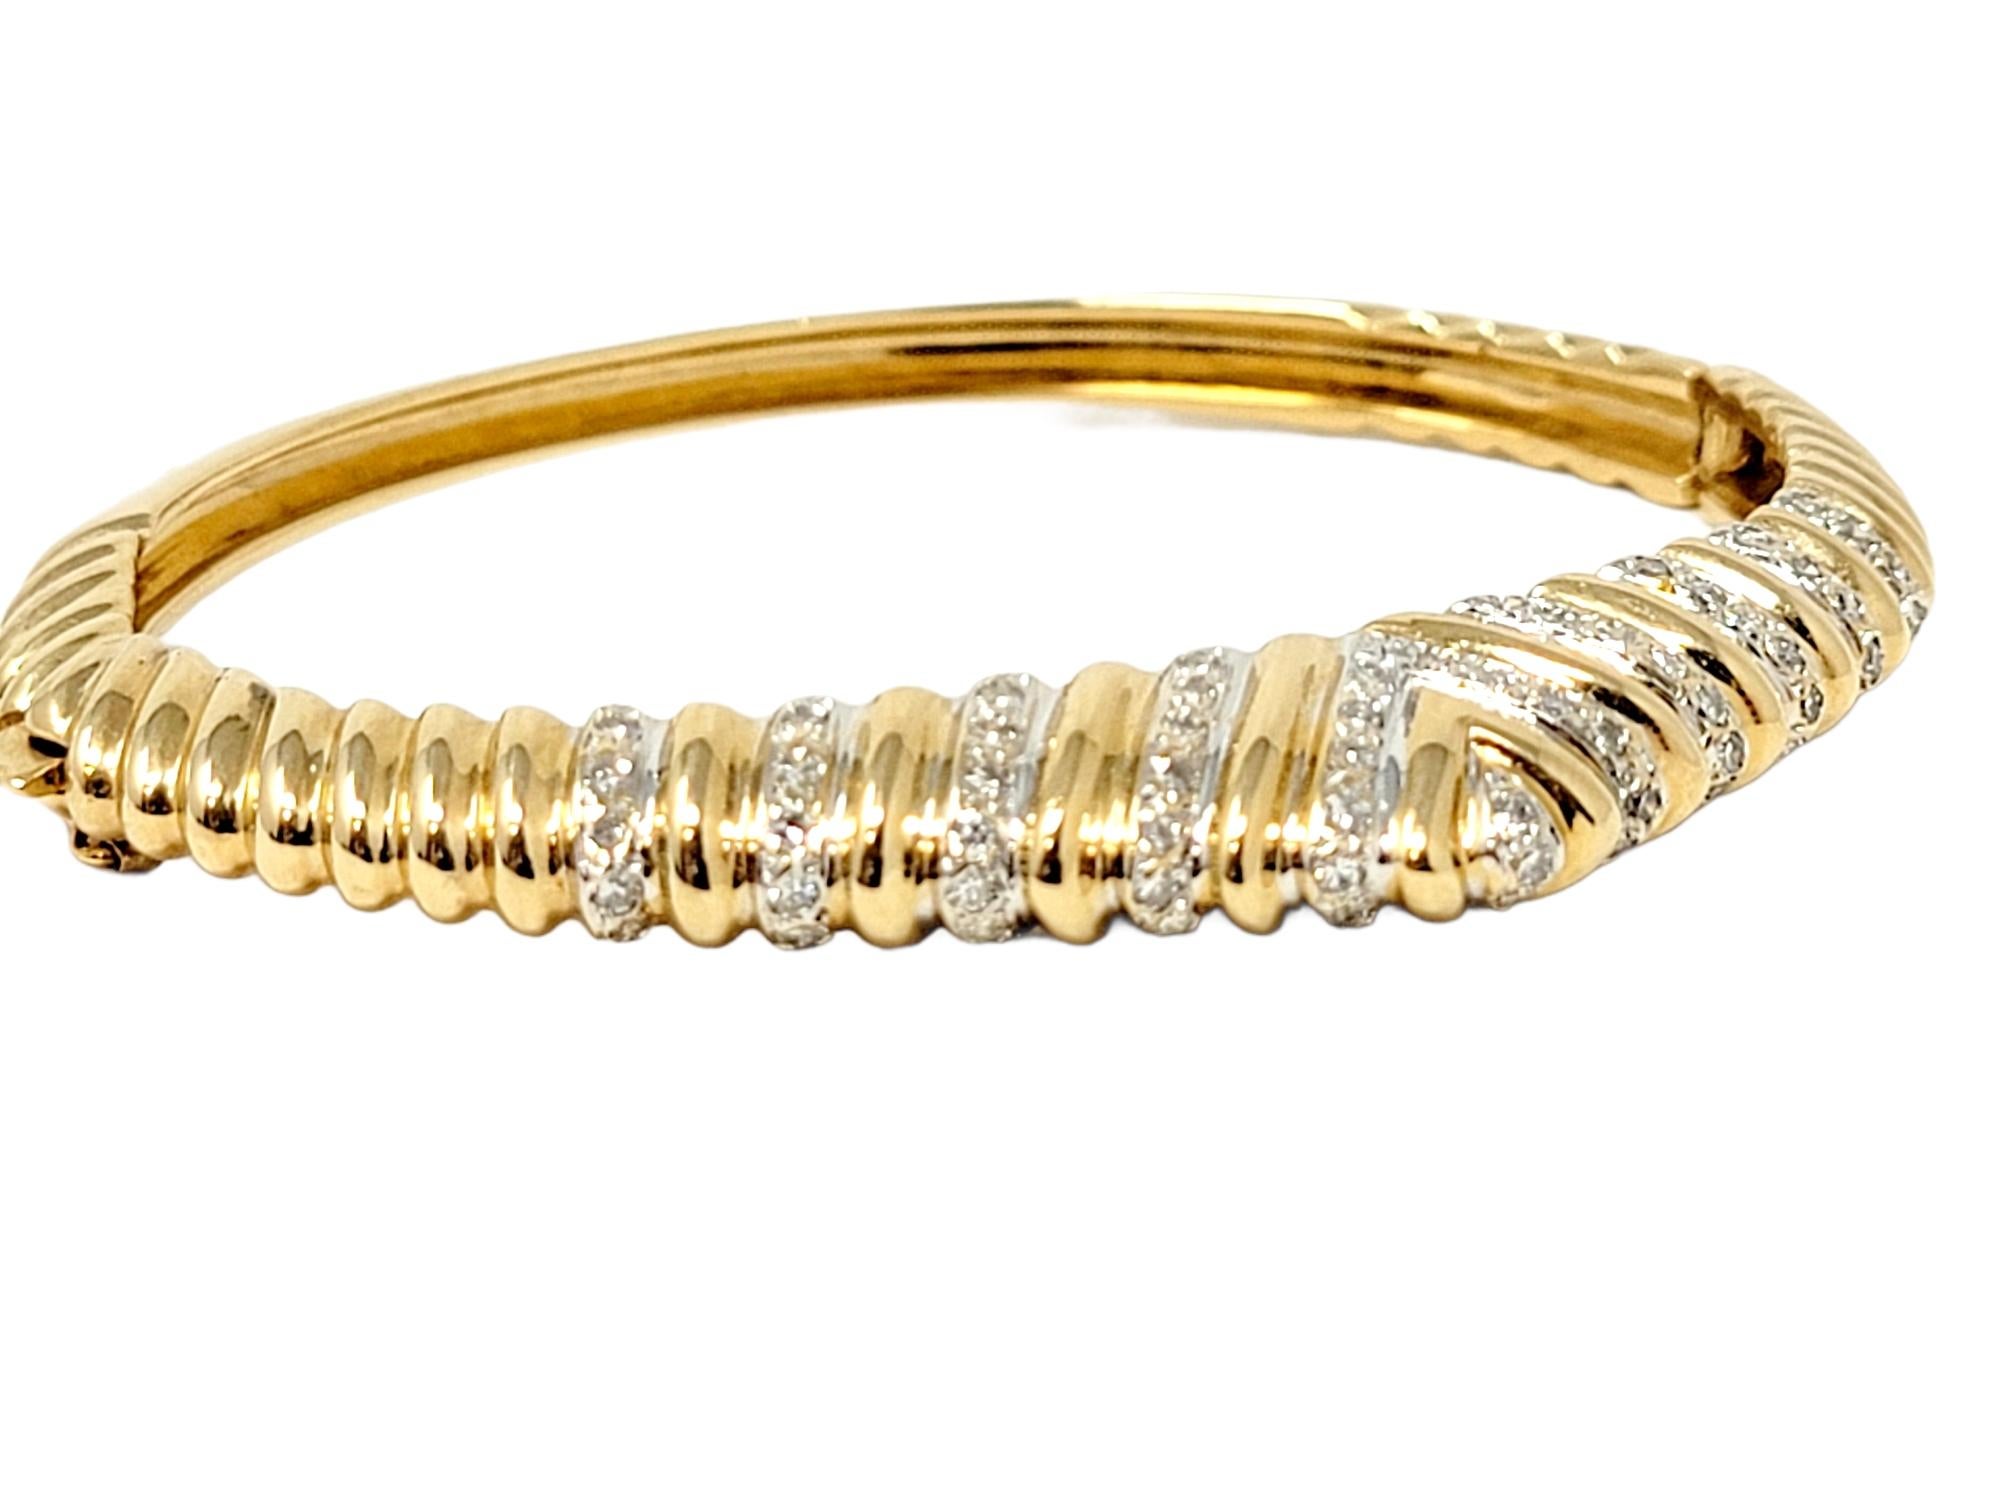 Beautifully designed, elegant bangle bracelet with an angled dome top. Featuring glittering diamonds and a contemporary ribbed chevron design, this lovely piece will make a wonderful additional to your jewelry wardrobe. Sparkling natural diamonds